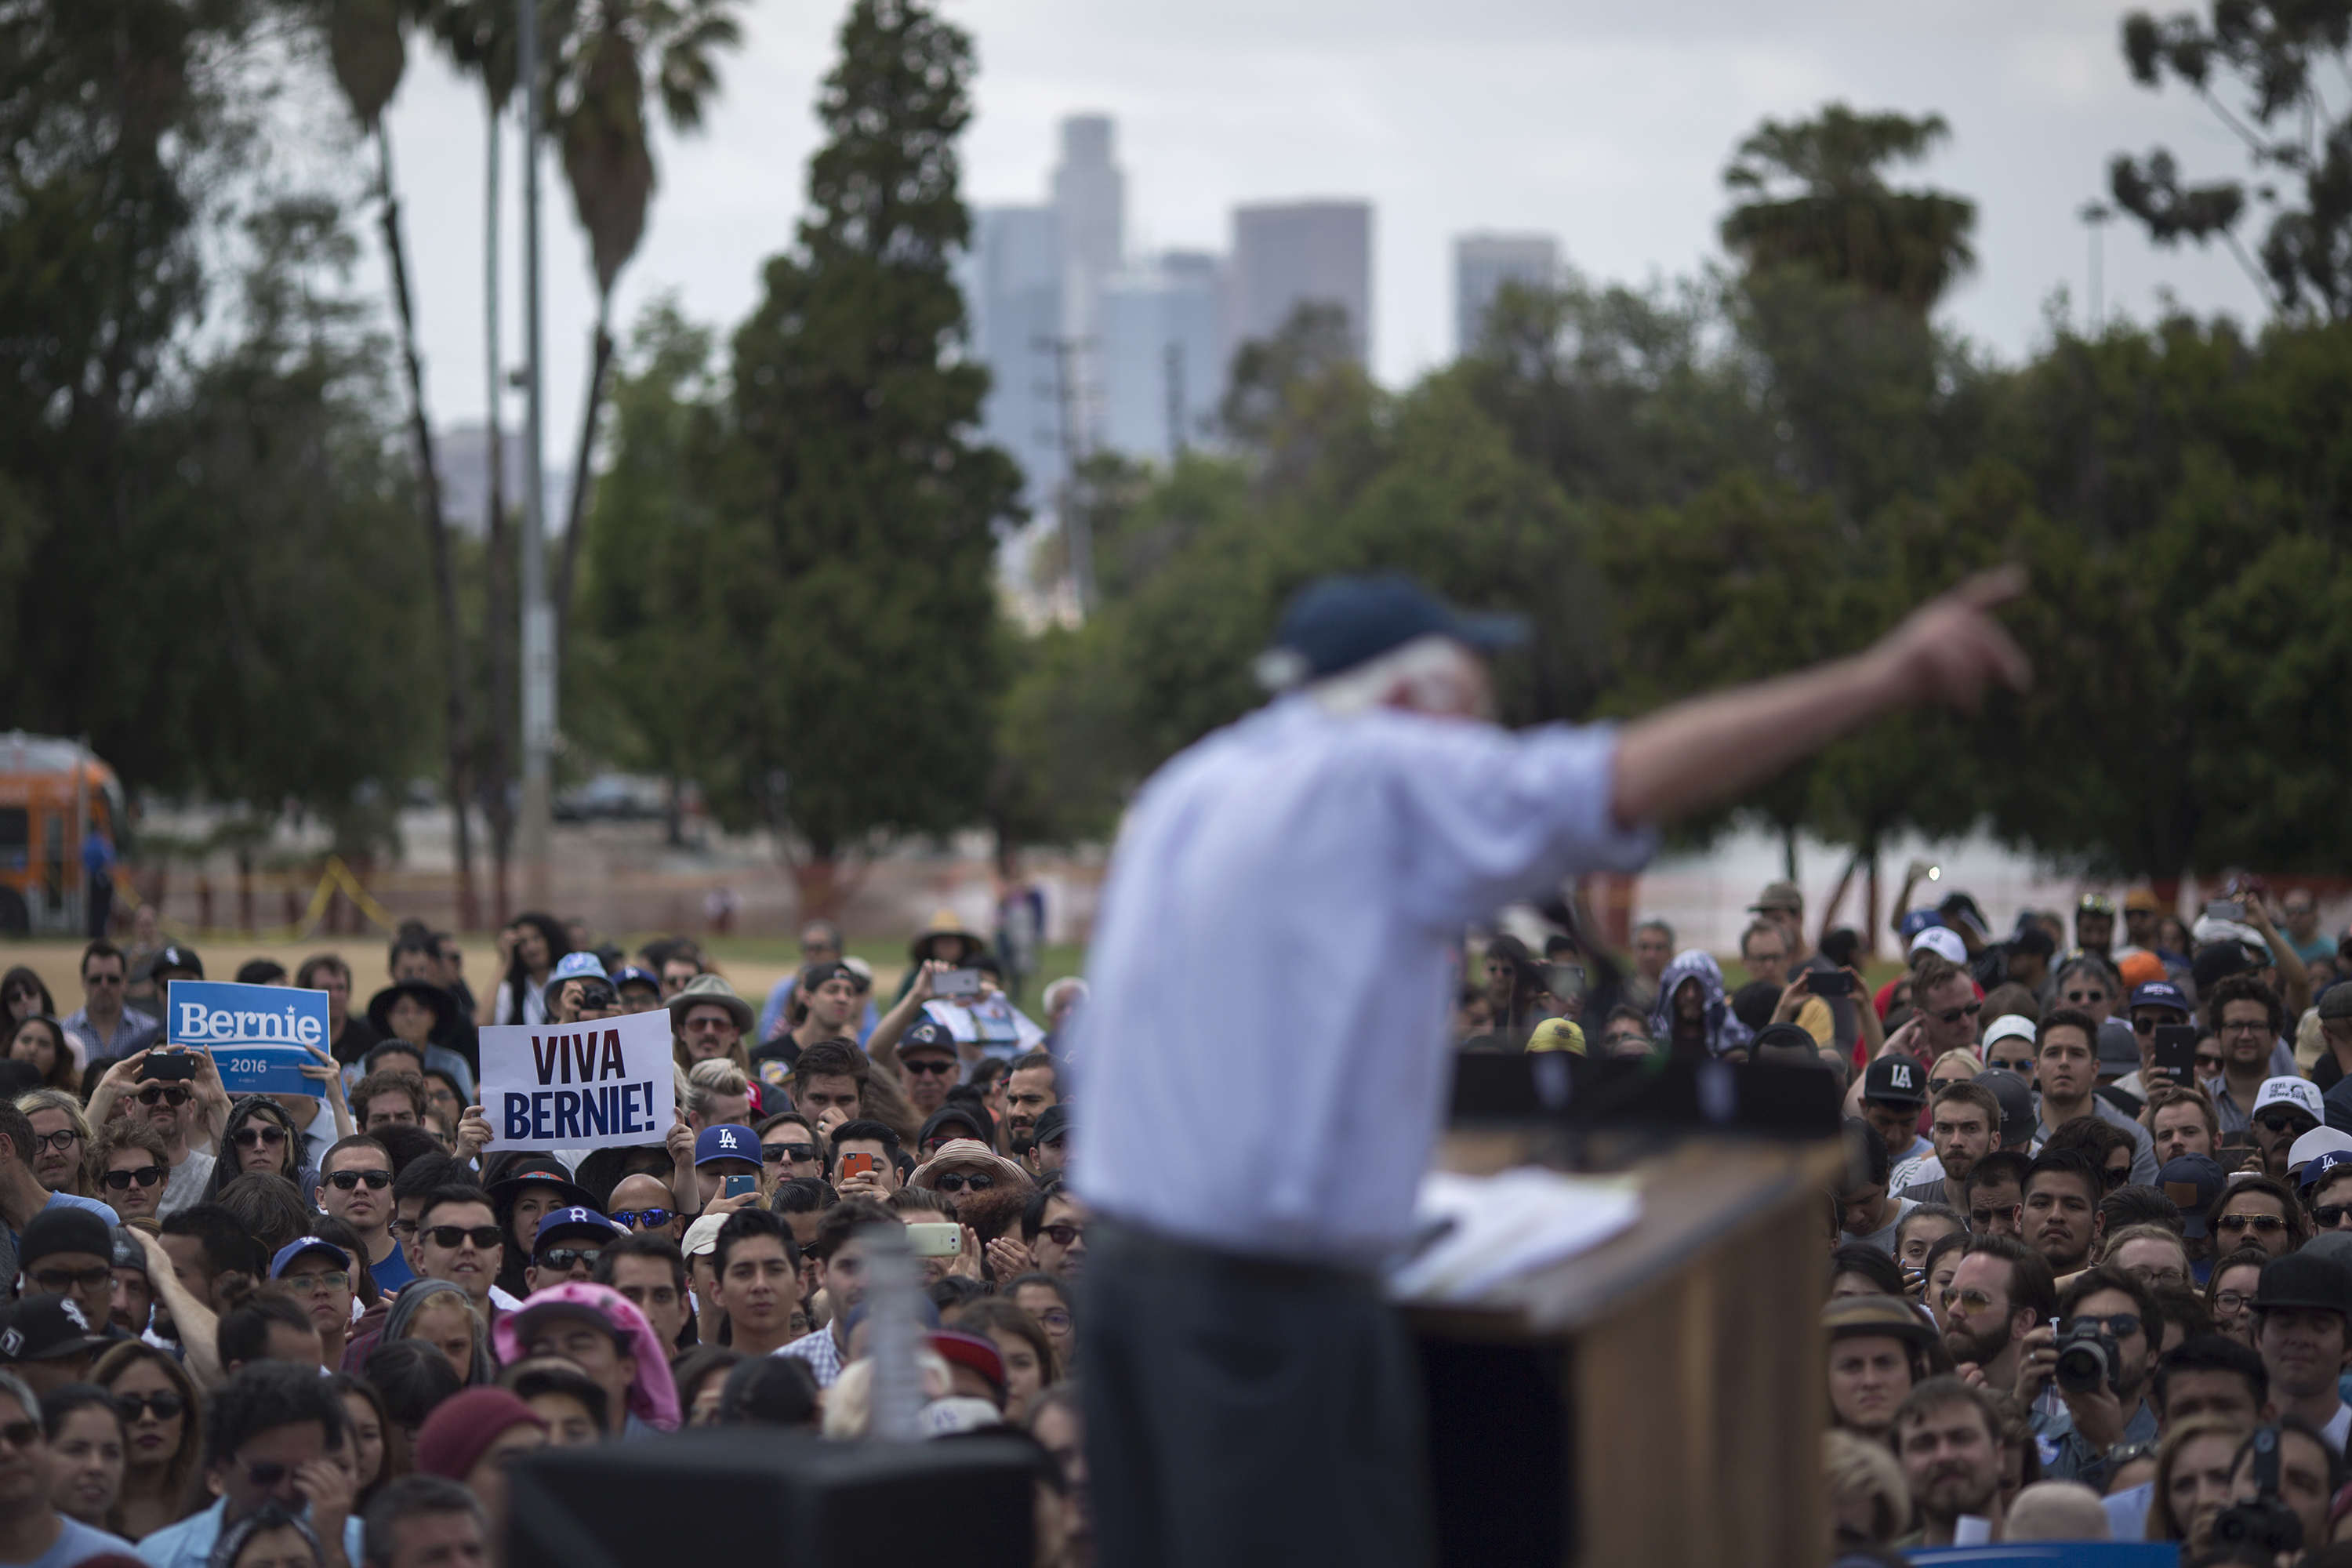 Democratic presidential candidate Sen. Bernie Sanders addresses a heavily-Latino crowd during a campaign rally at Lincoln Park on May 23, 2016 in East Los Angeles, California. Sanders is campaigning ahead of the June 7 California primary. 